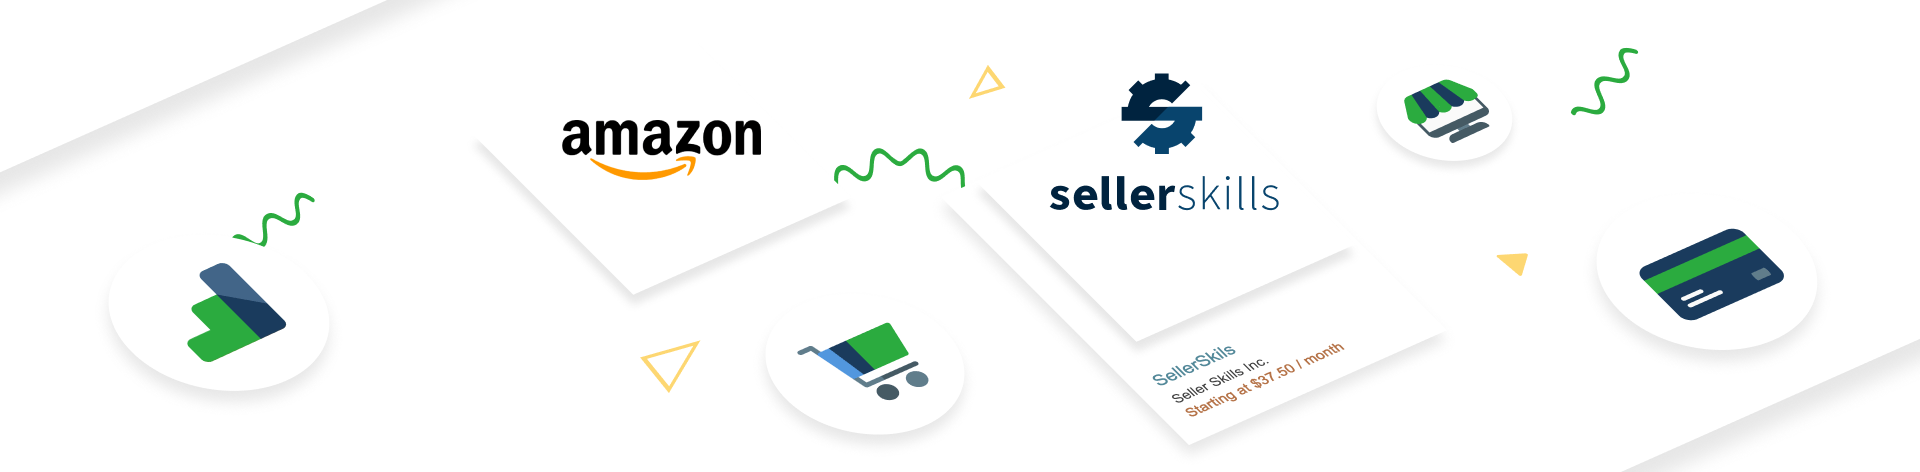 How to Sell on Amazon with SellerSkills